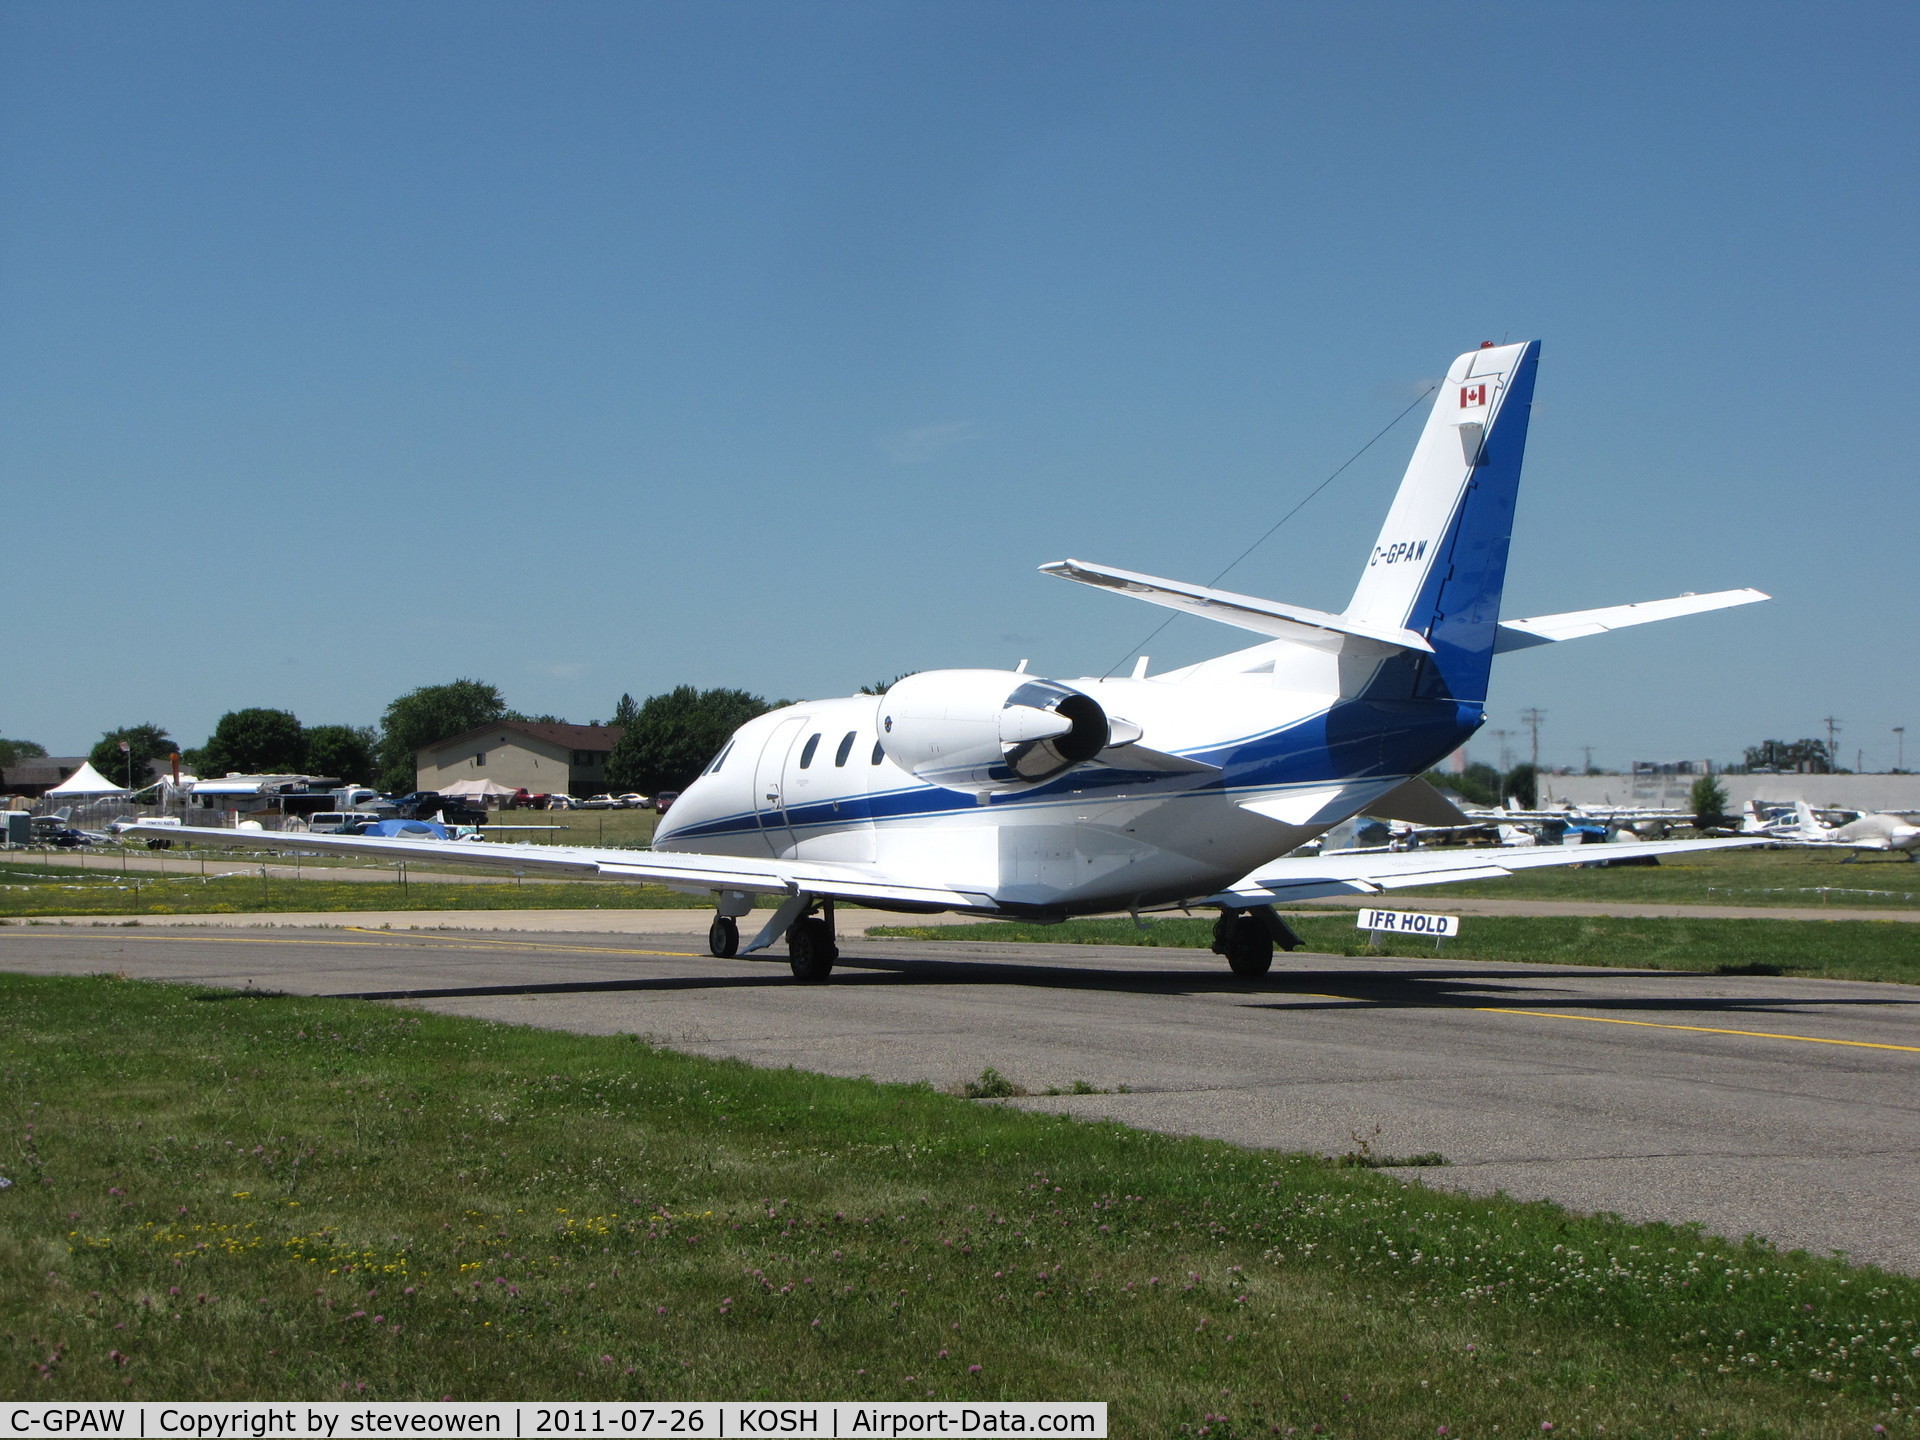 C-GPAW, 2007 Cessna 560XLS C/N 560-5681, on Taxiway Bravo at KOSH during EAA2011